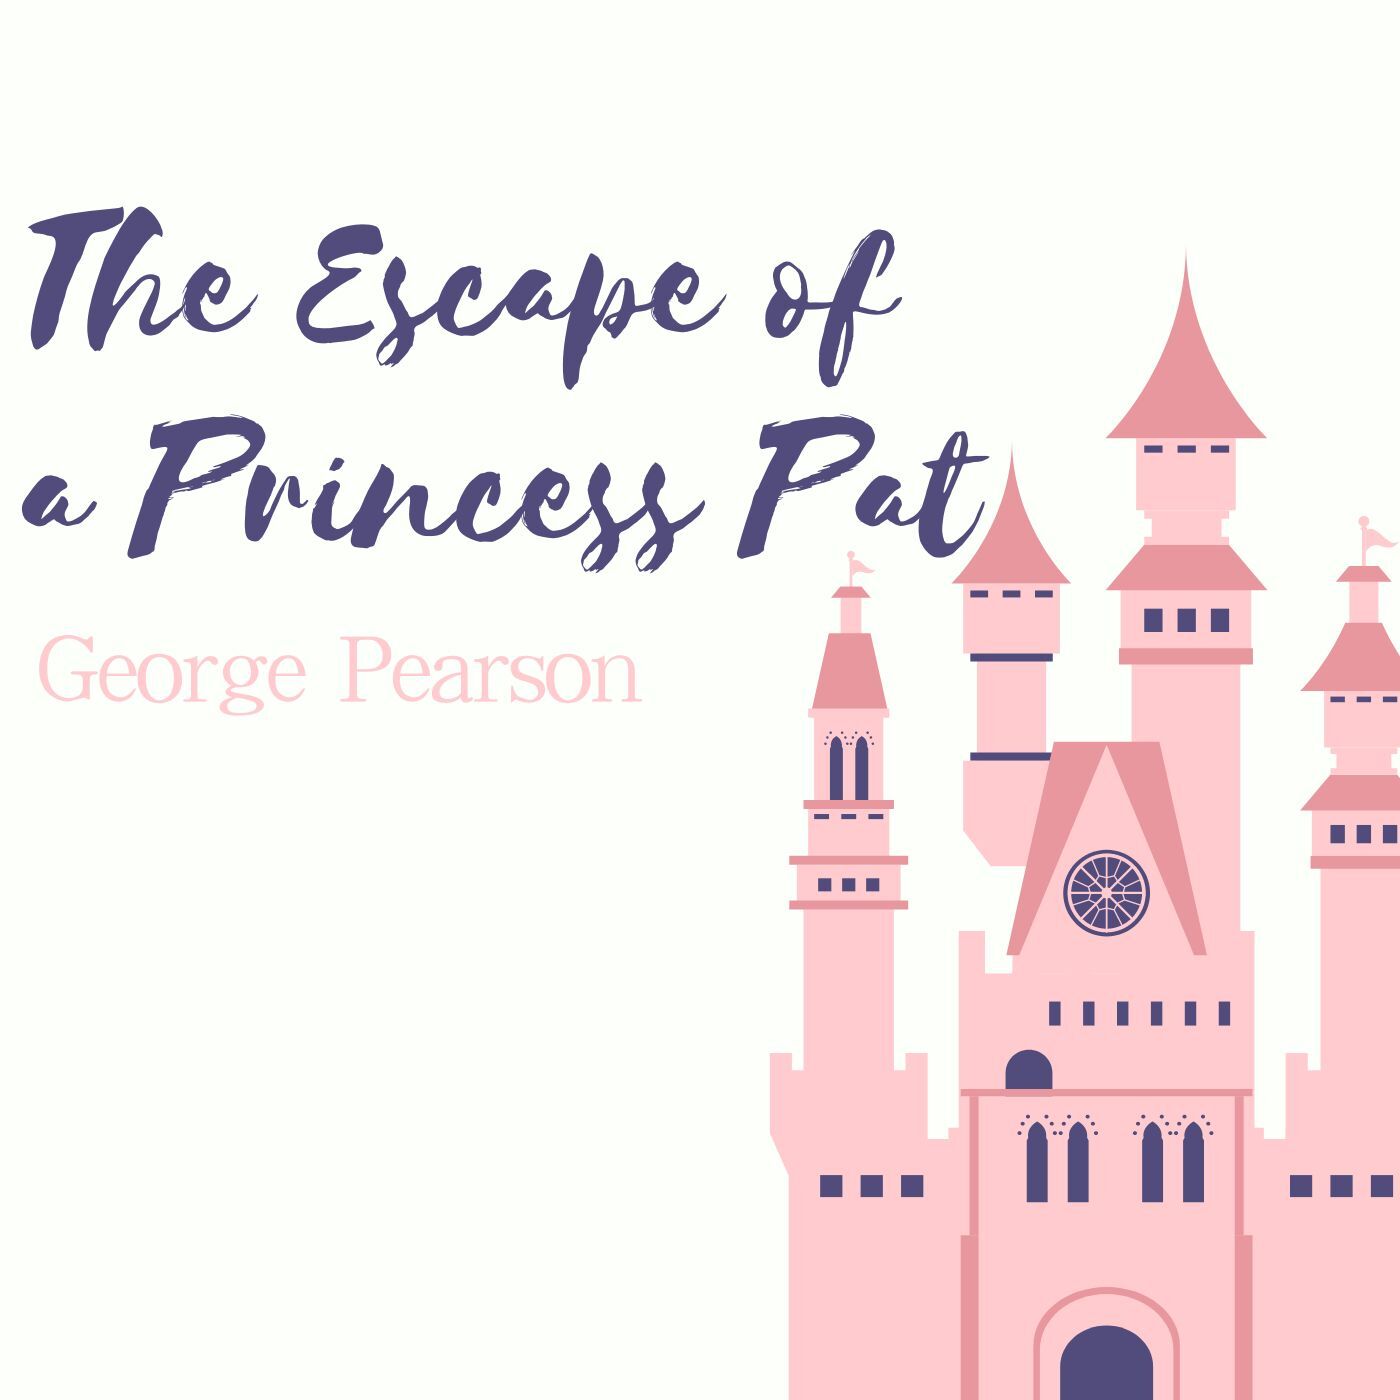 The Escape of a Princess Pat by George Pearson